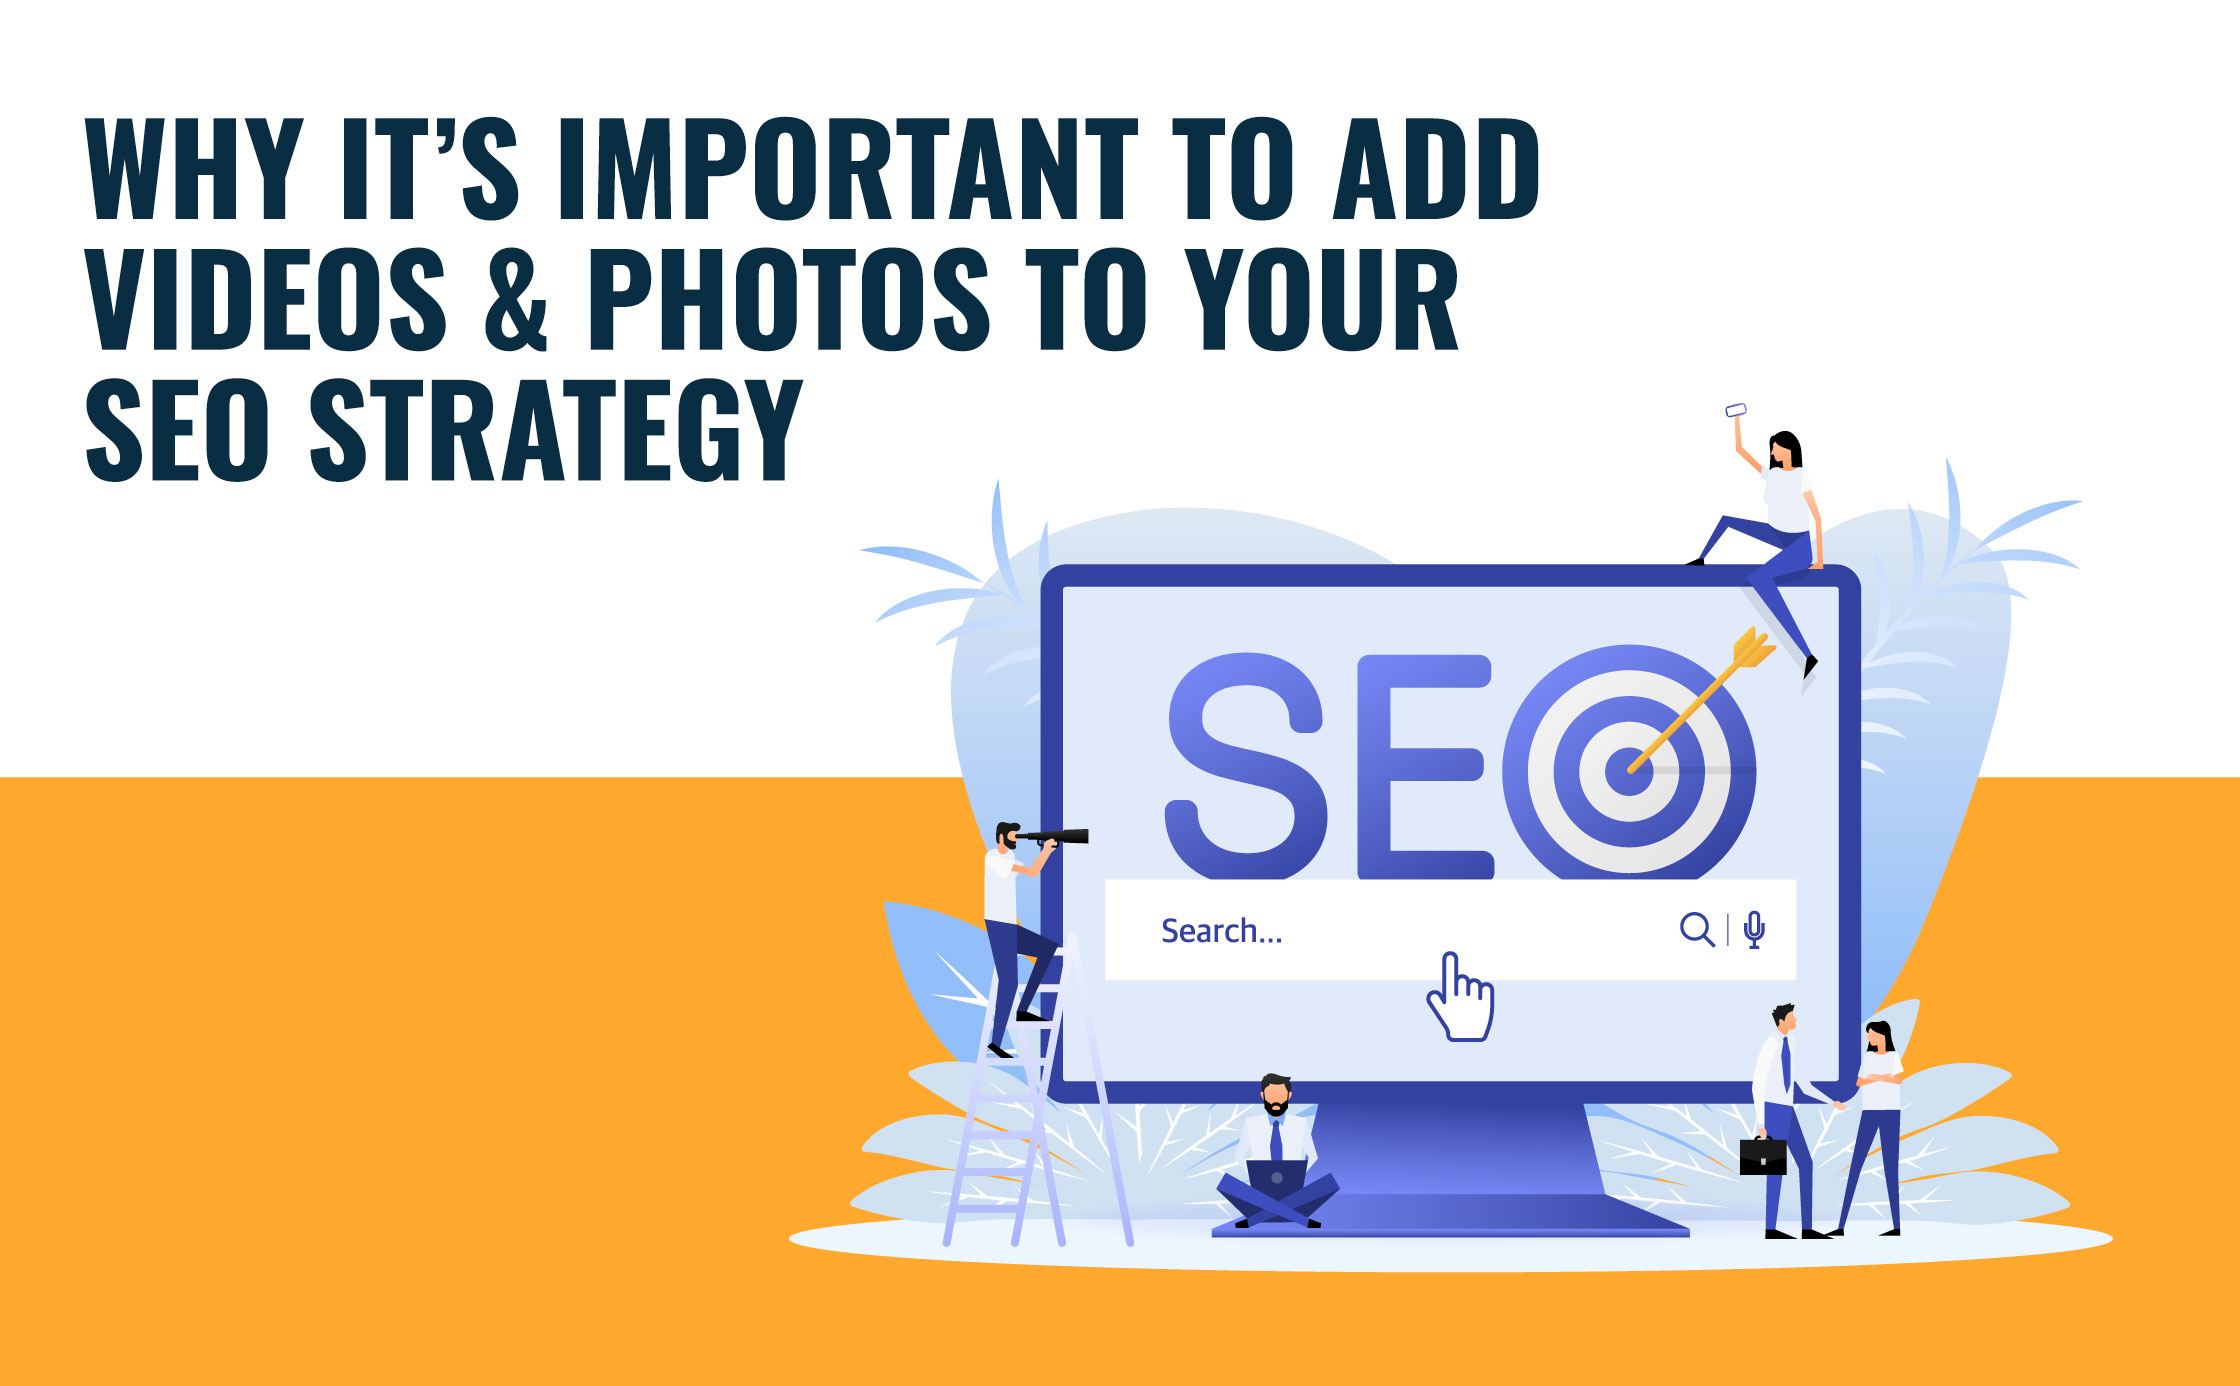 Why It’s Important to Add Videos & Photos to Your SEO Strategy